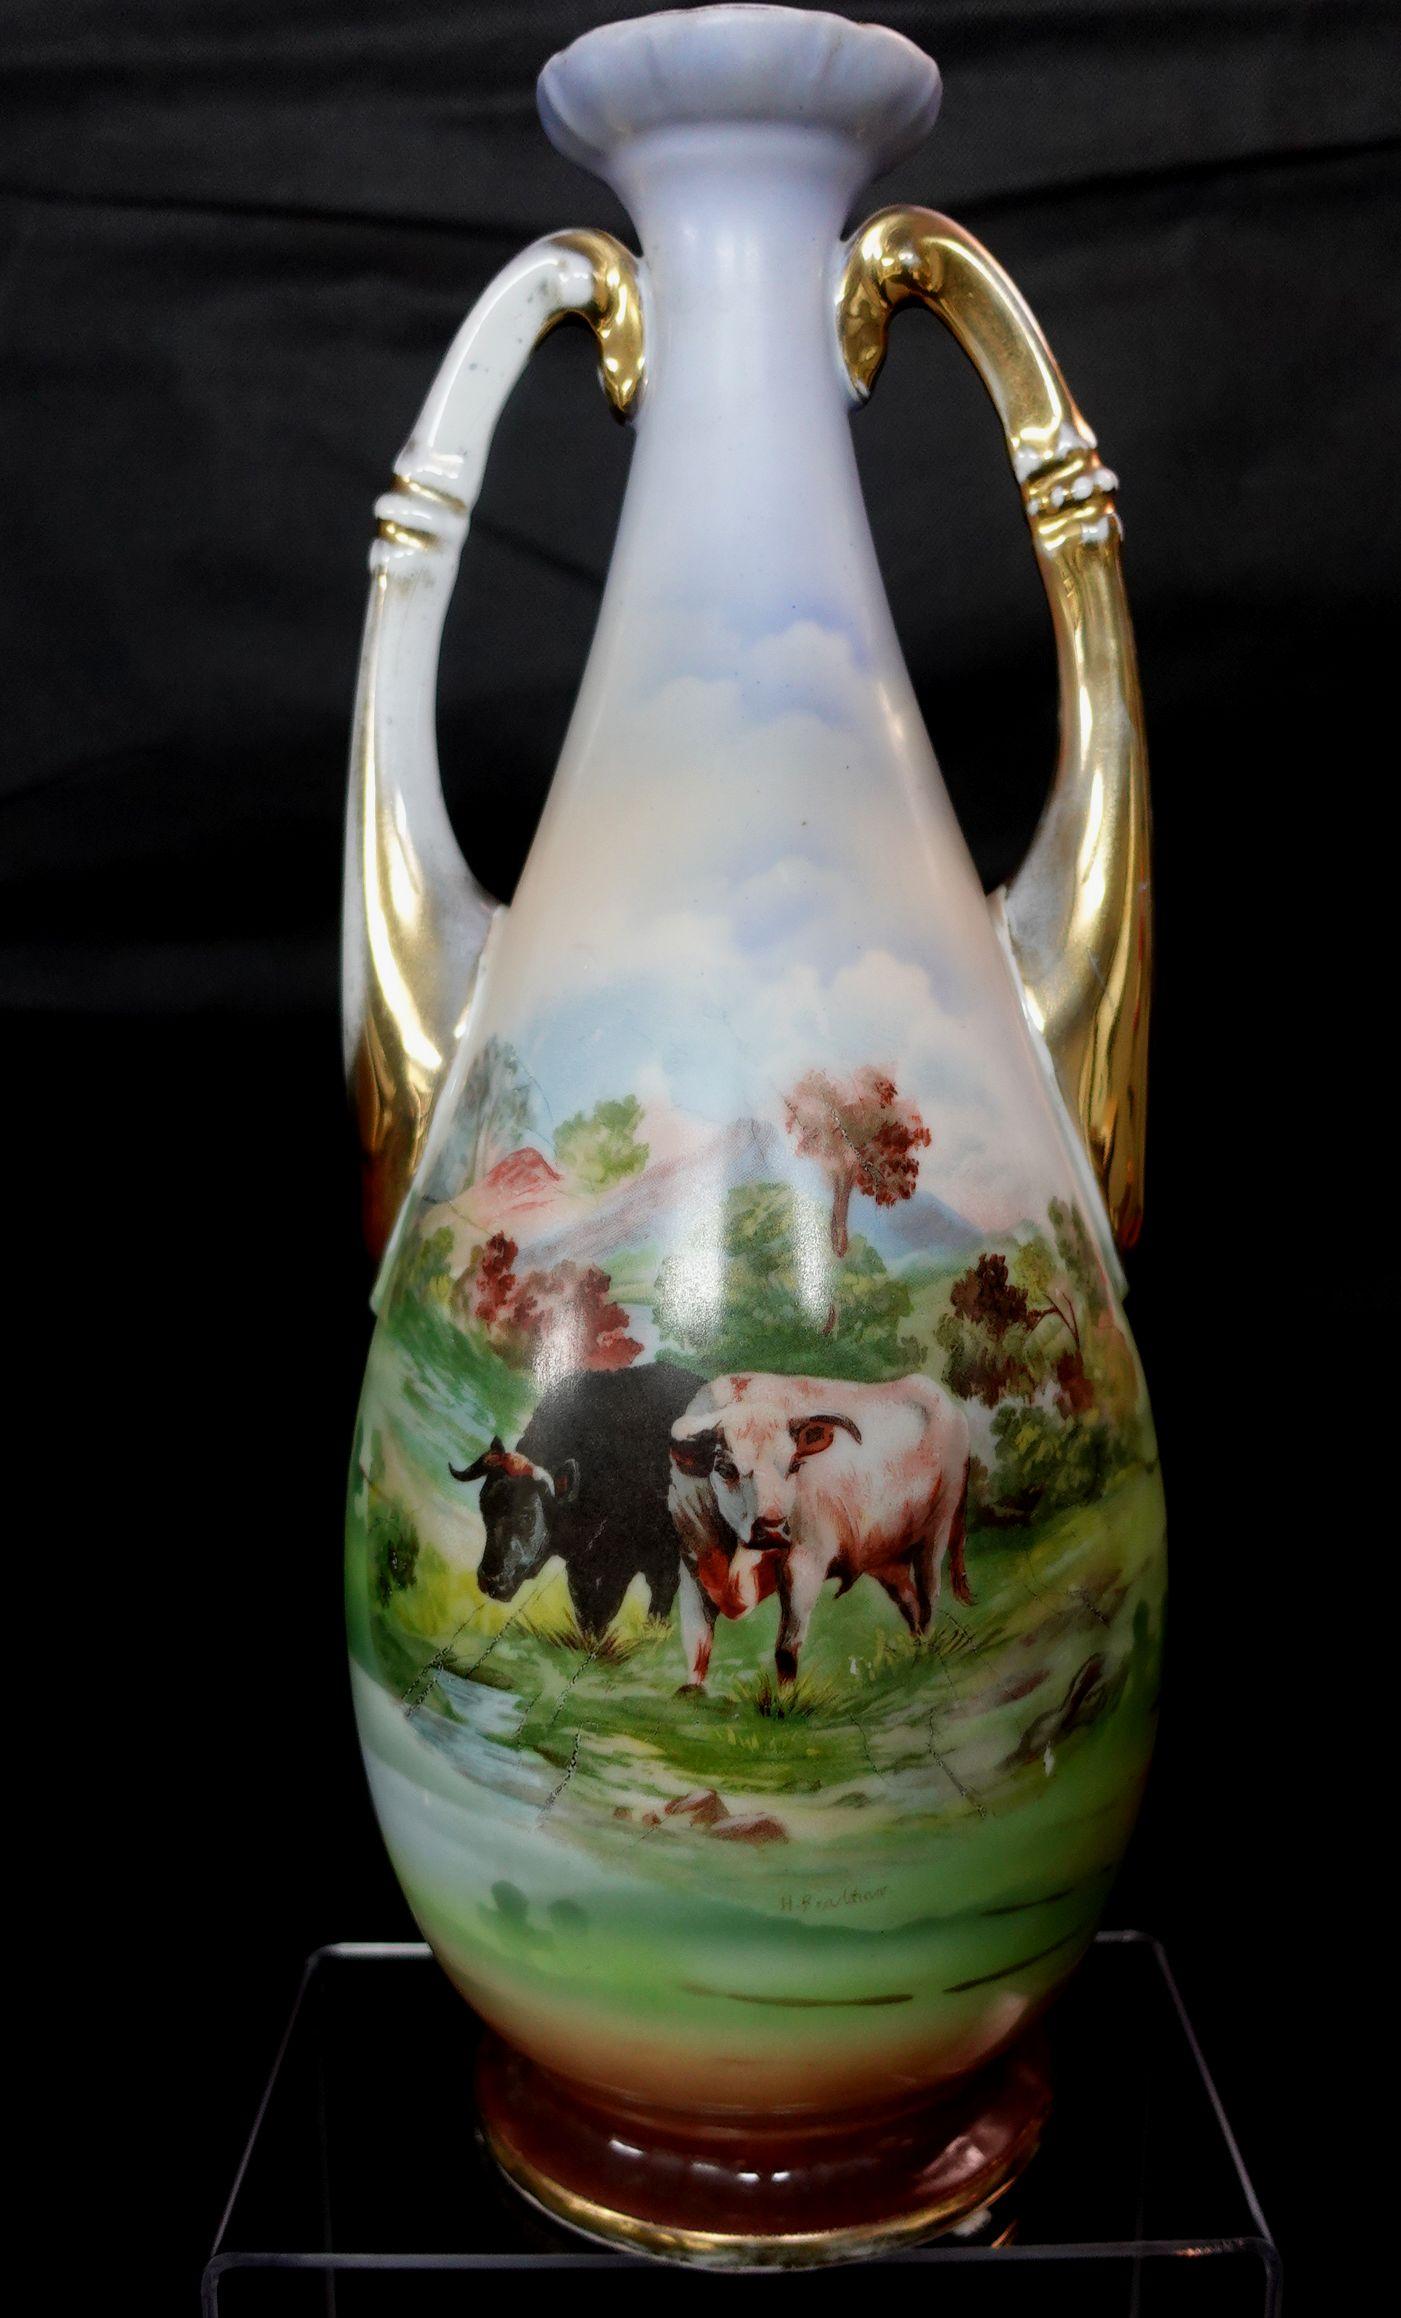 Antique 1890s Victoria Austria Vase. Comprising Austrian porcelain vases with hand-painted decorated scenes of cattle watering. Measure: Height 14 inches.
    